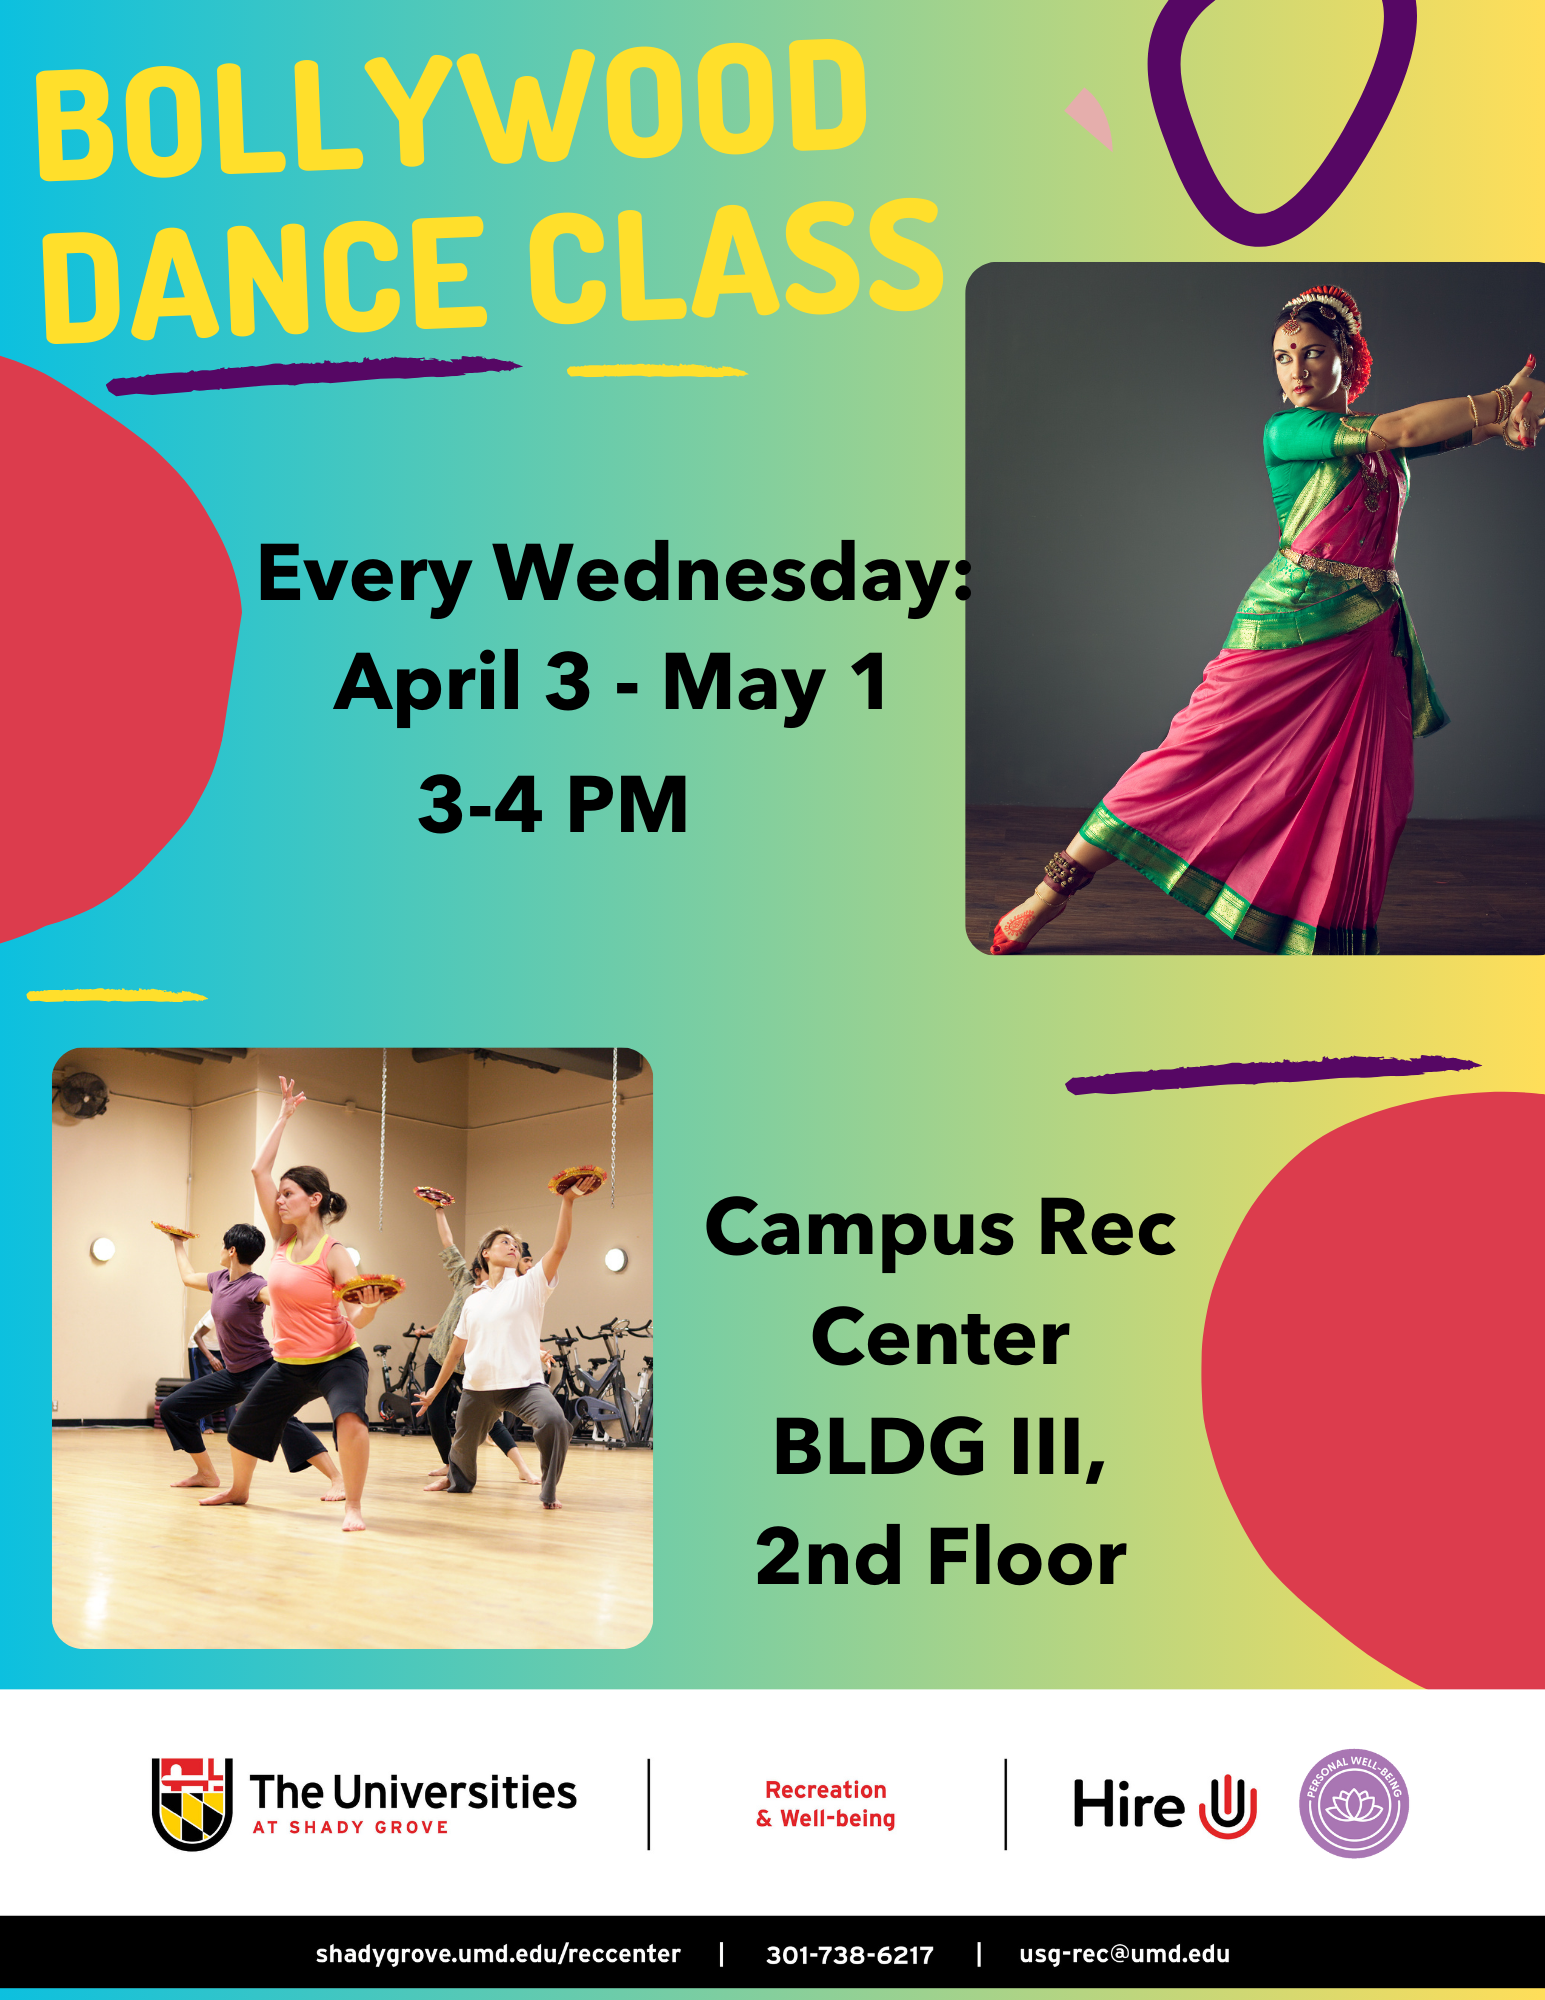 Bollywood dance class: Every Wednesday: 4/10 - 5/1, from 3-4PM Join USG’s Recreation and Well-being with a student instructor-led Bollywood class! Learn a new dancing form while working on your fitness! Location: Campus Rec Center BLDG III, 2nd Floor